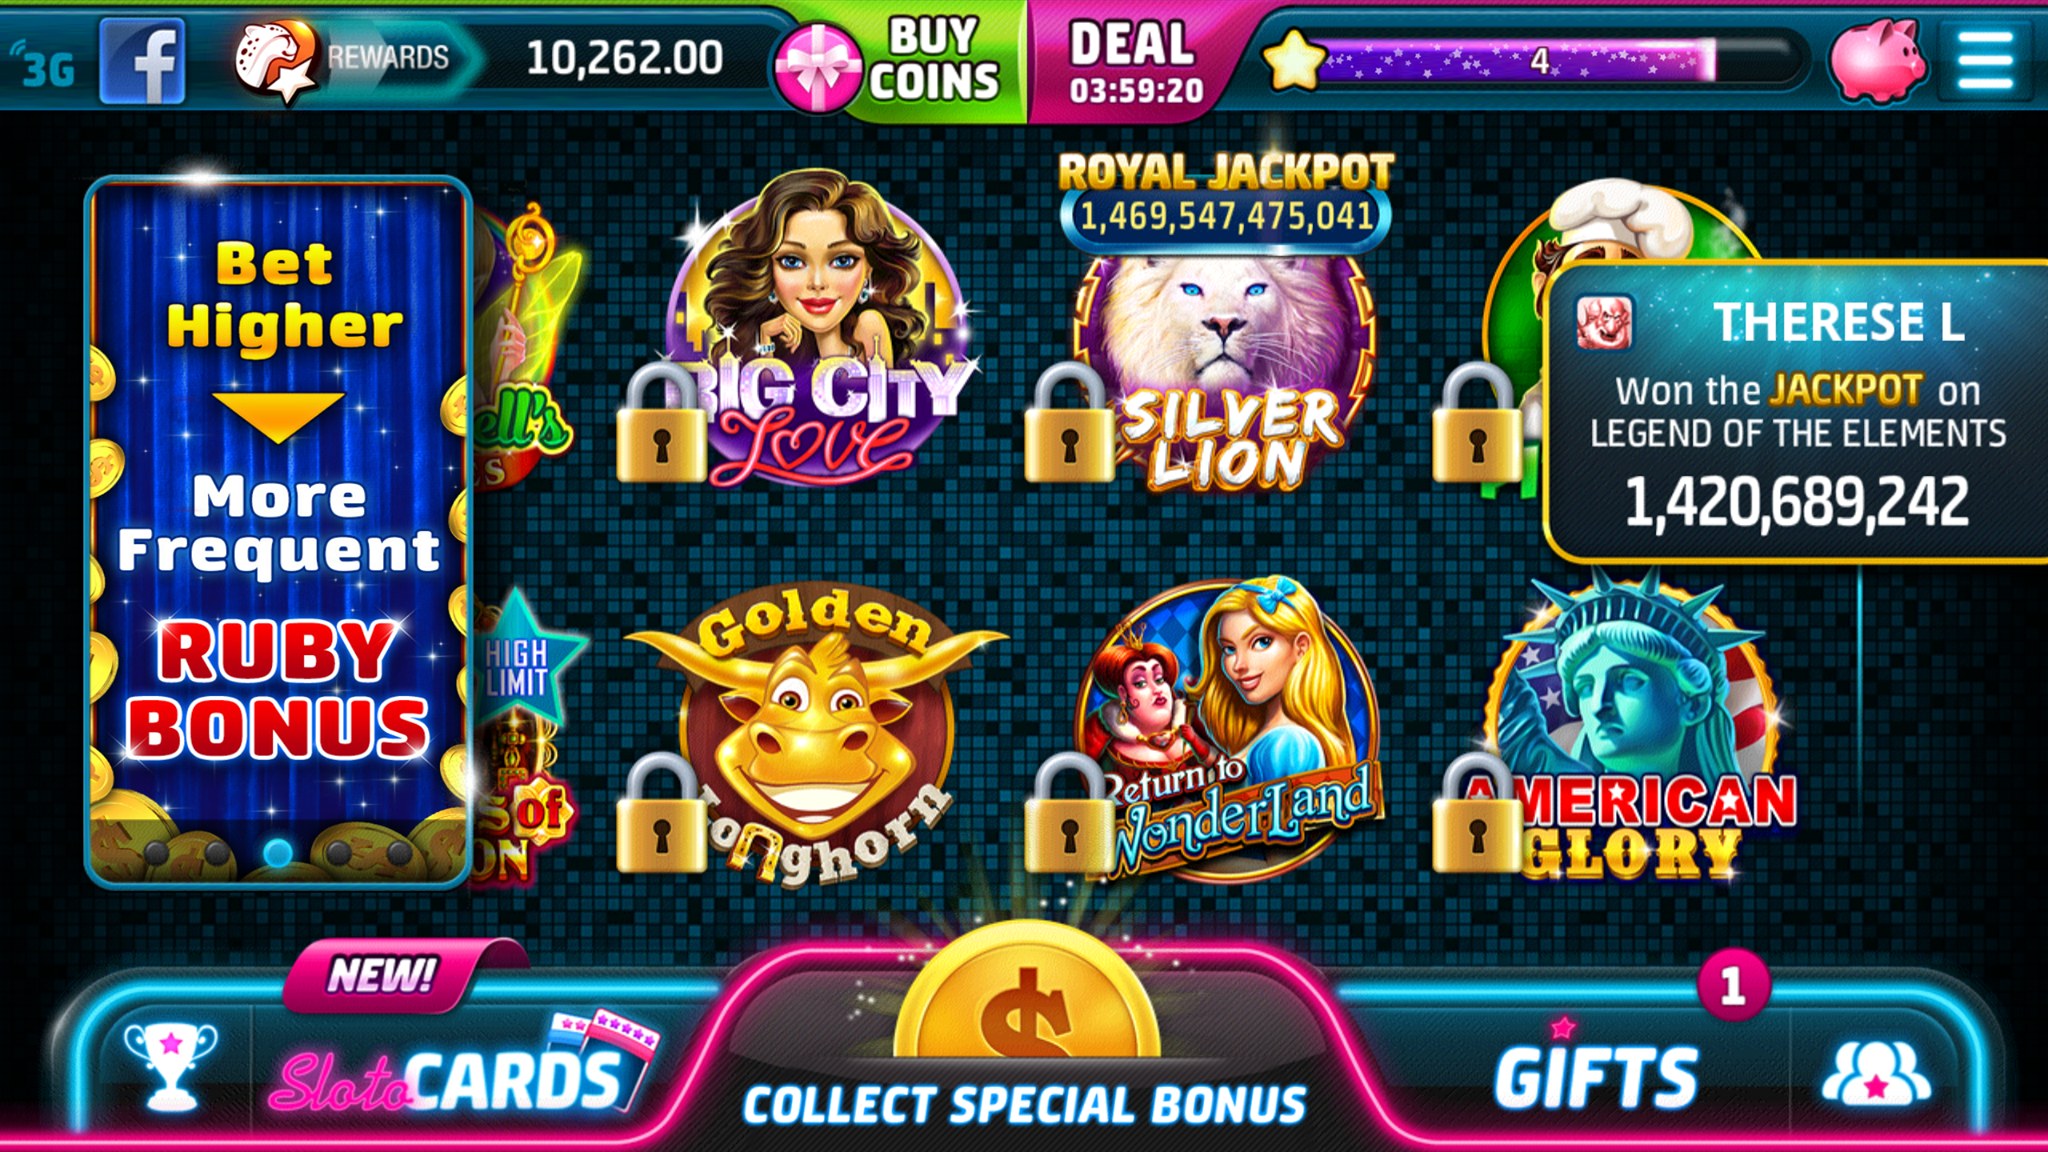 Play Slotomania Online For Free